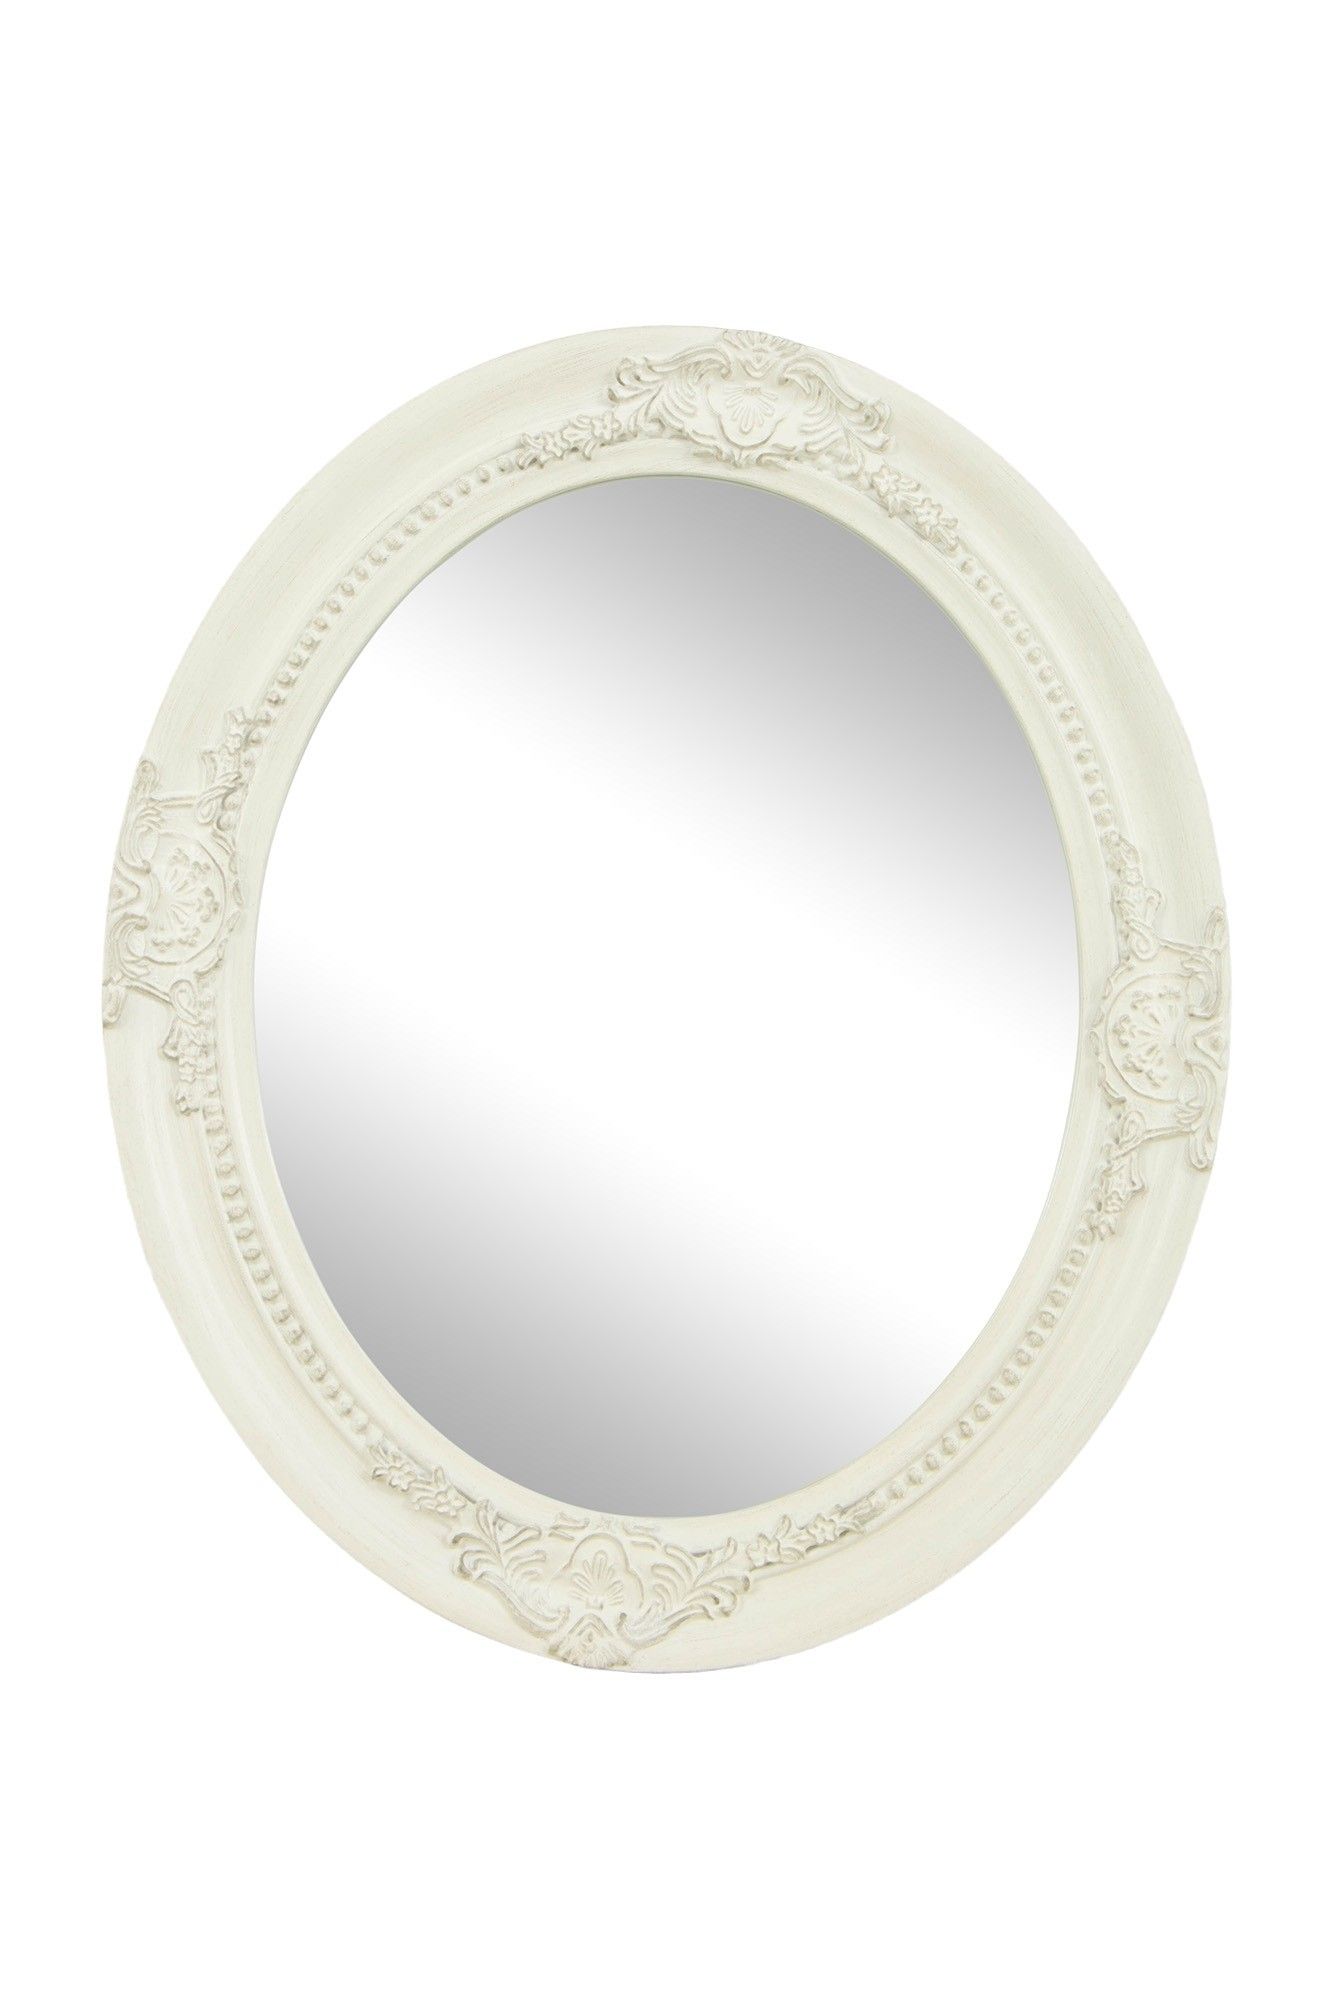 Veral Oval Hanging Mirror Antique White 63Cmx52Cm | Furniture & Home Intended For Ceiling Hung Oval Mirrors (View 13 of 15)